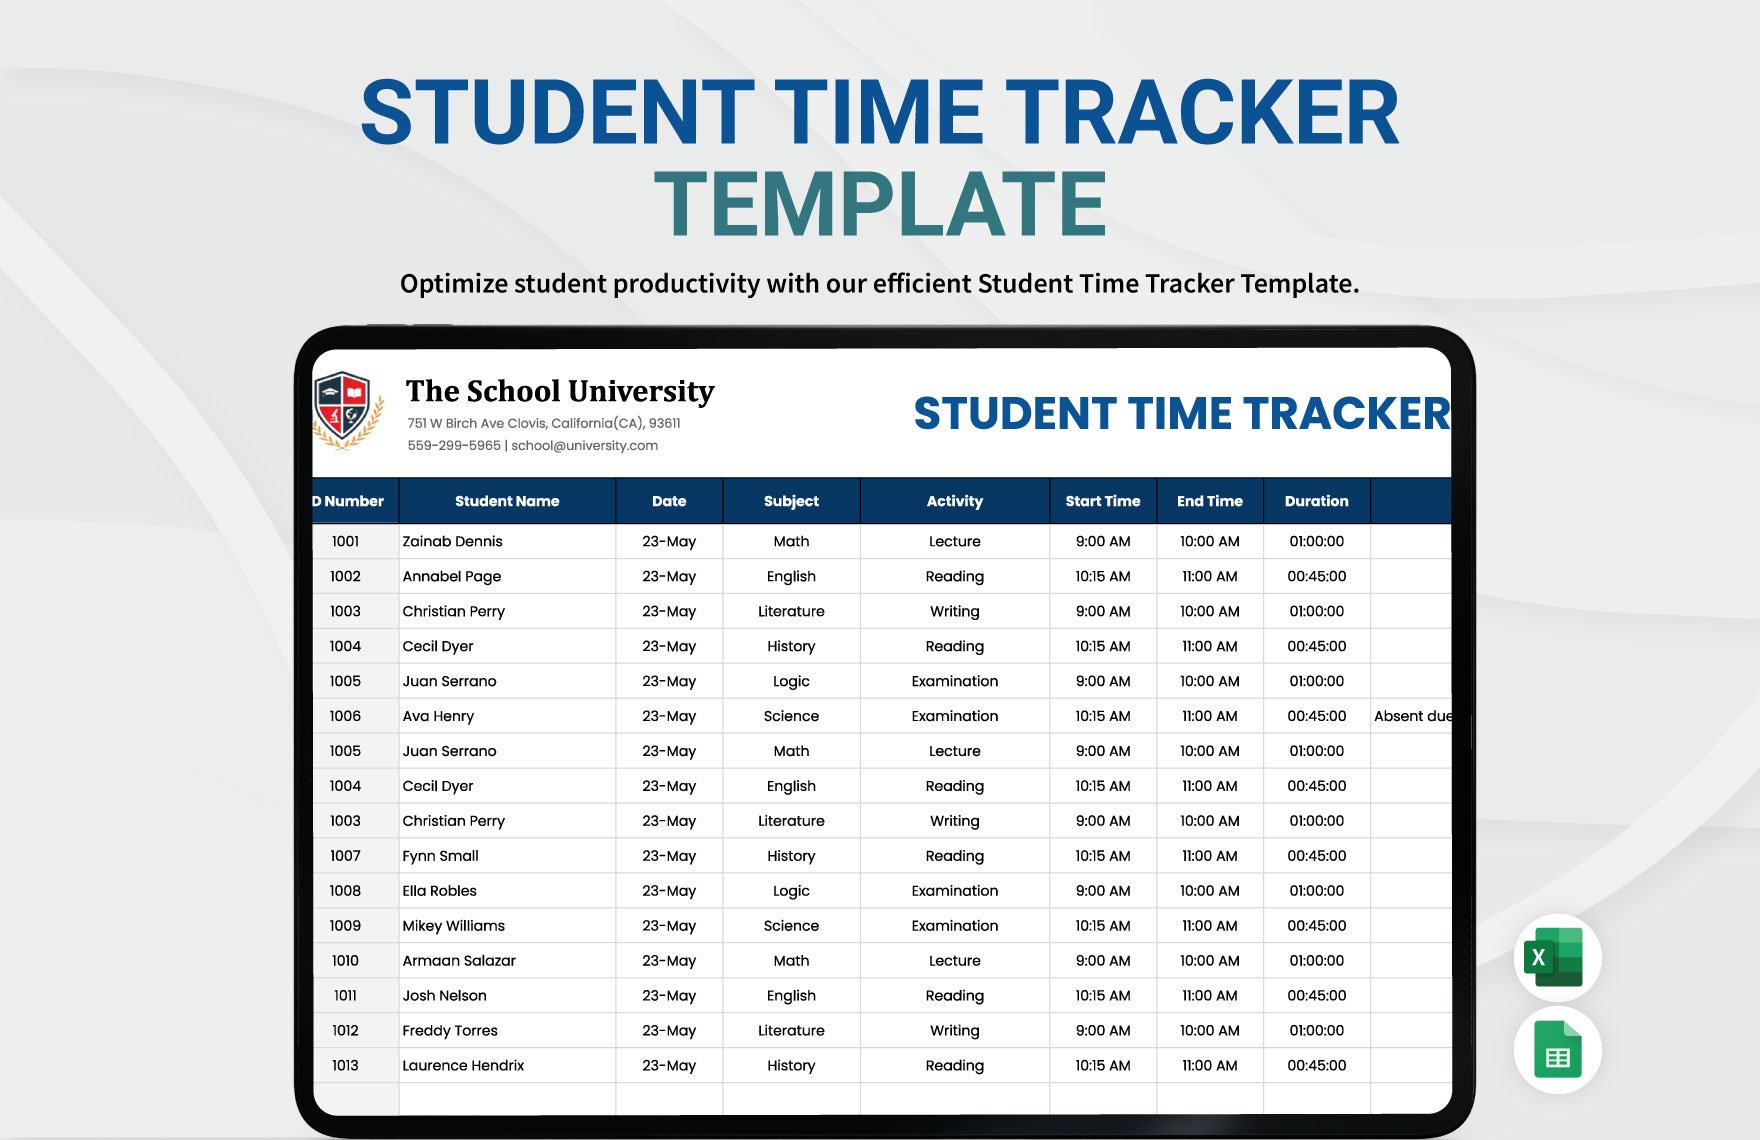 Student Time Tracker Template in Excel, Google Sheets